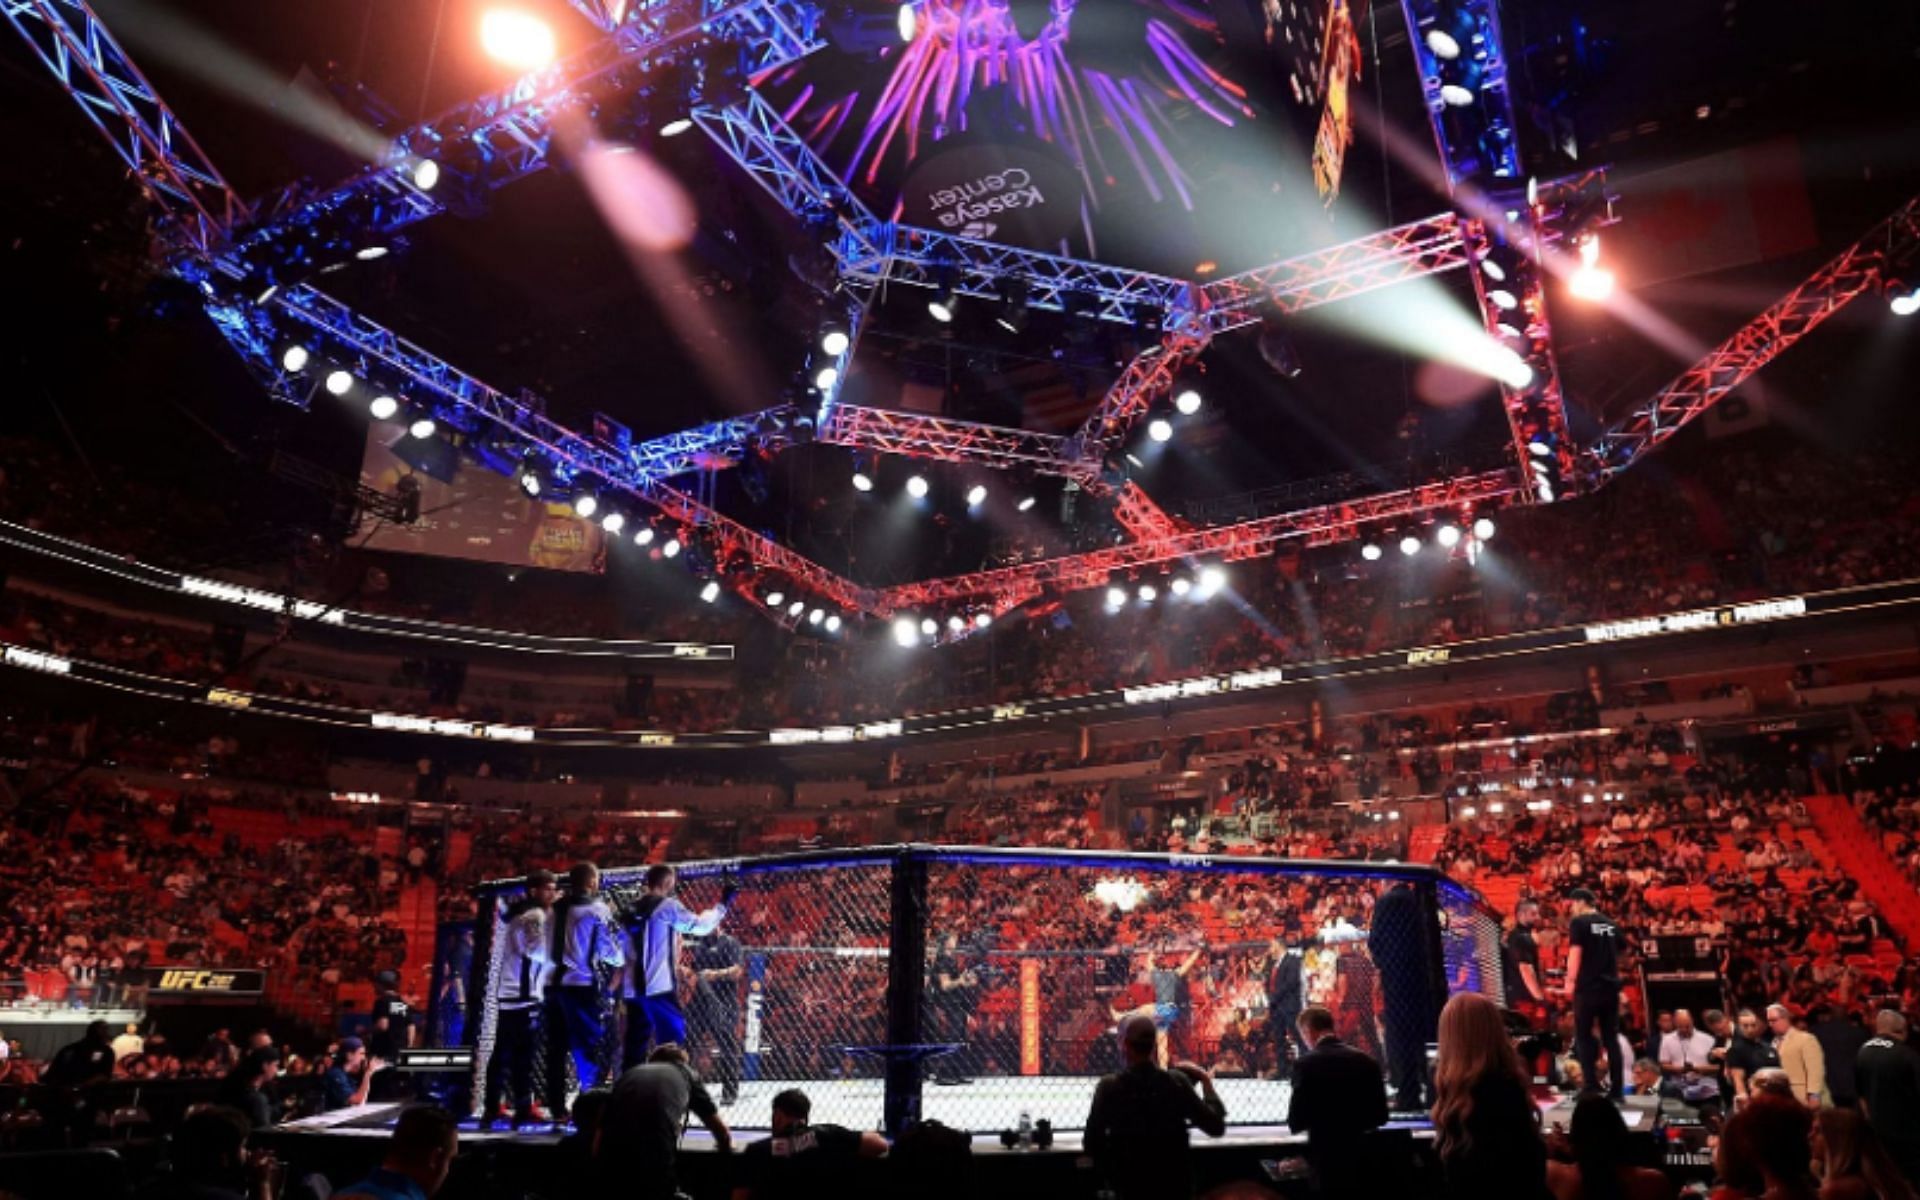 The UFC octagon surrounded by live audience